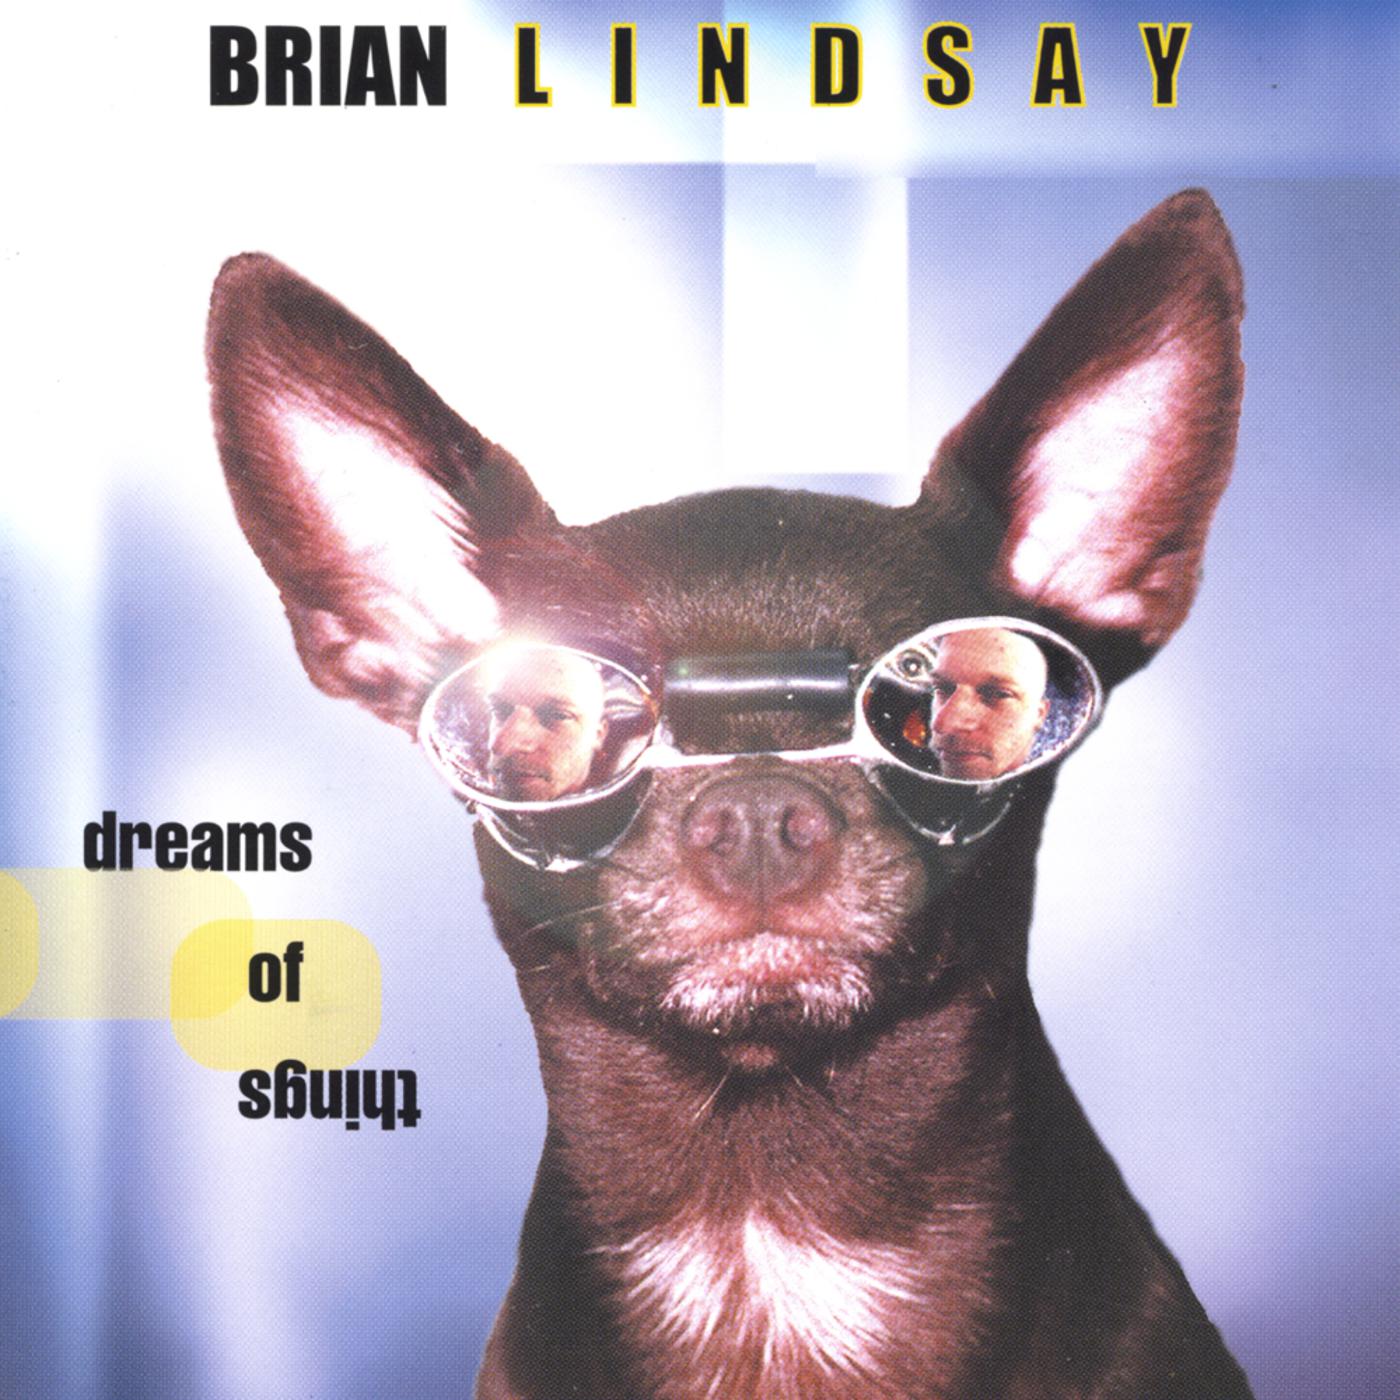 Brian Lindsay - The Winds of Zion